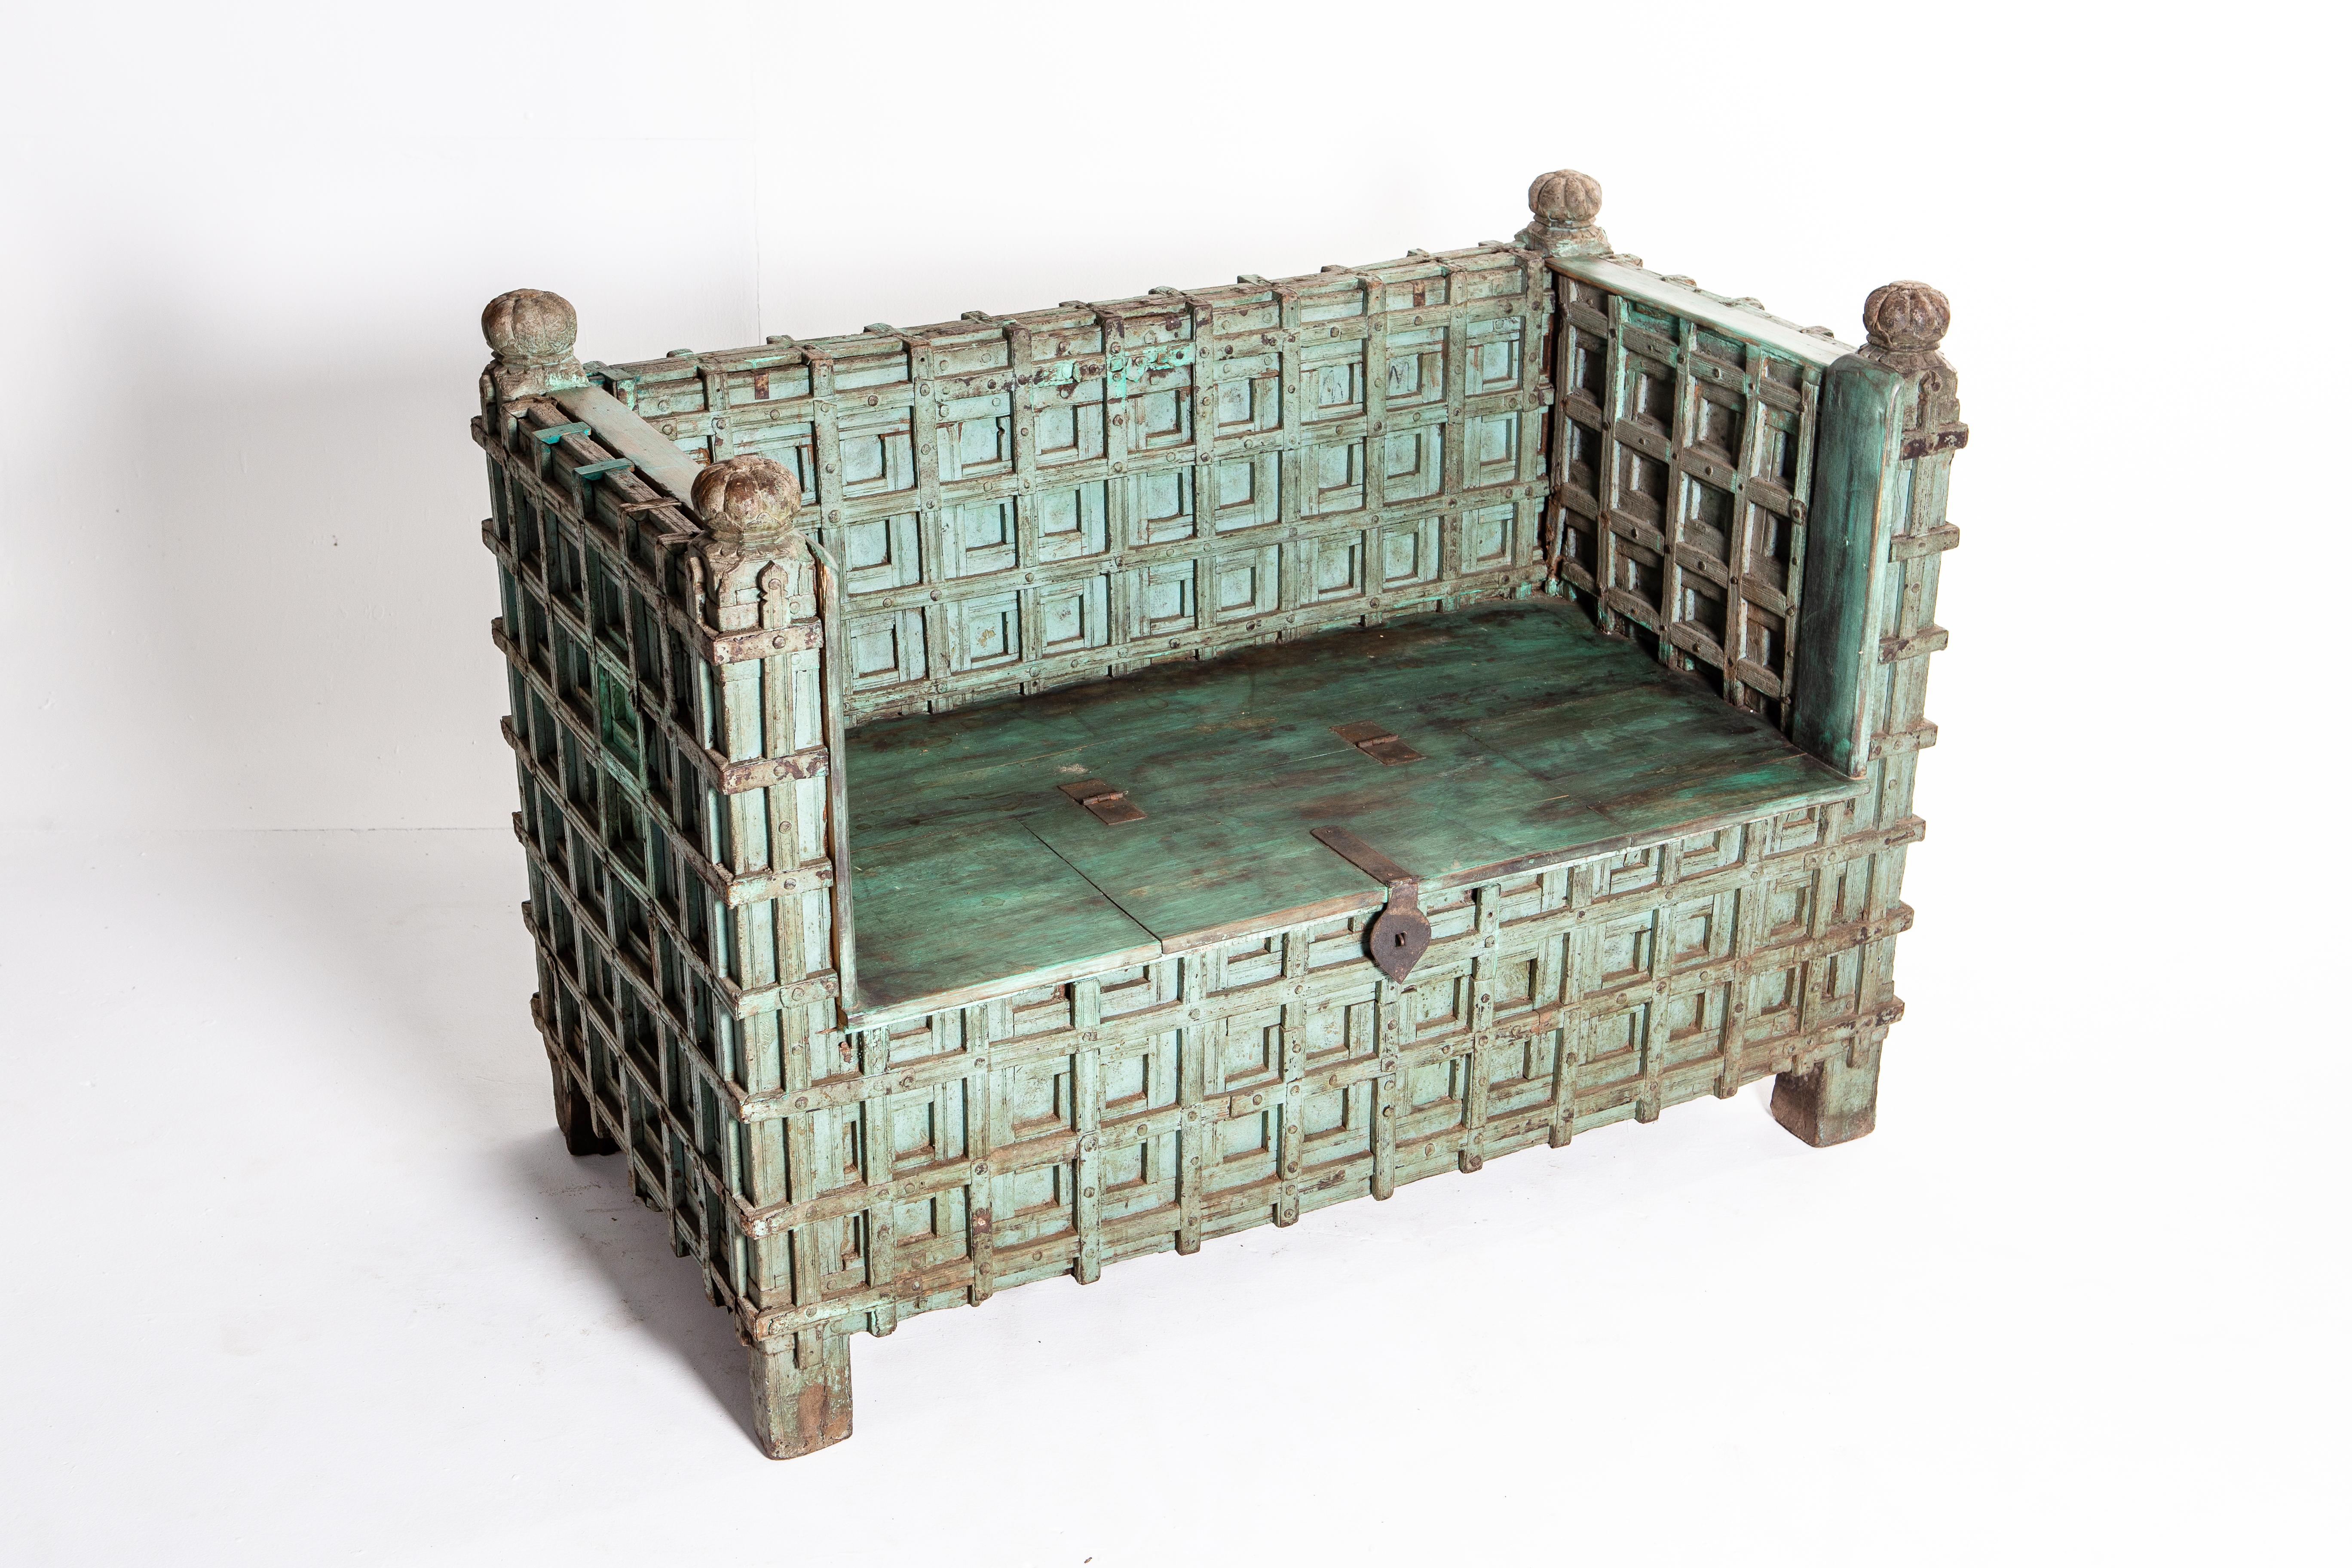 20th Century Indian Strongbox Converted to Bench